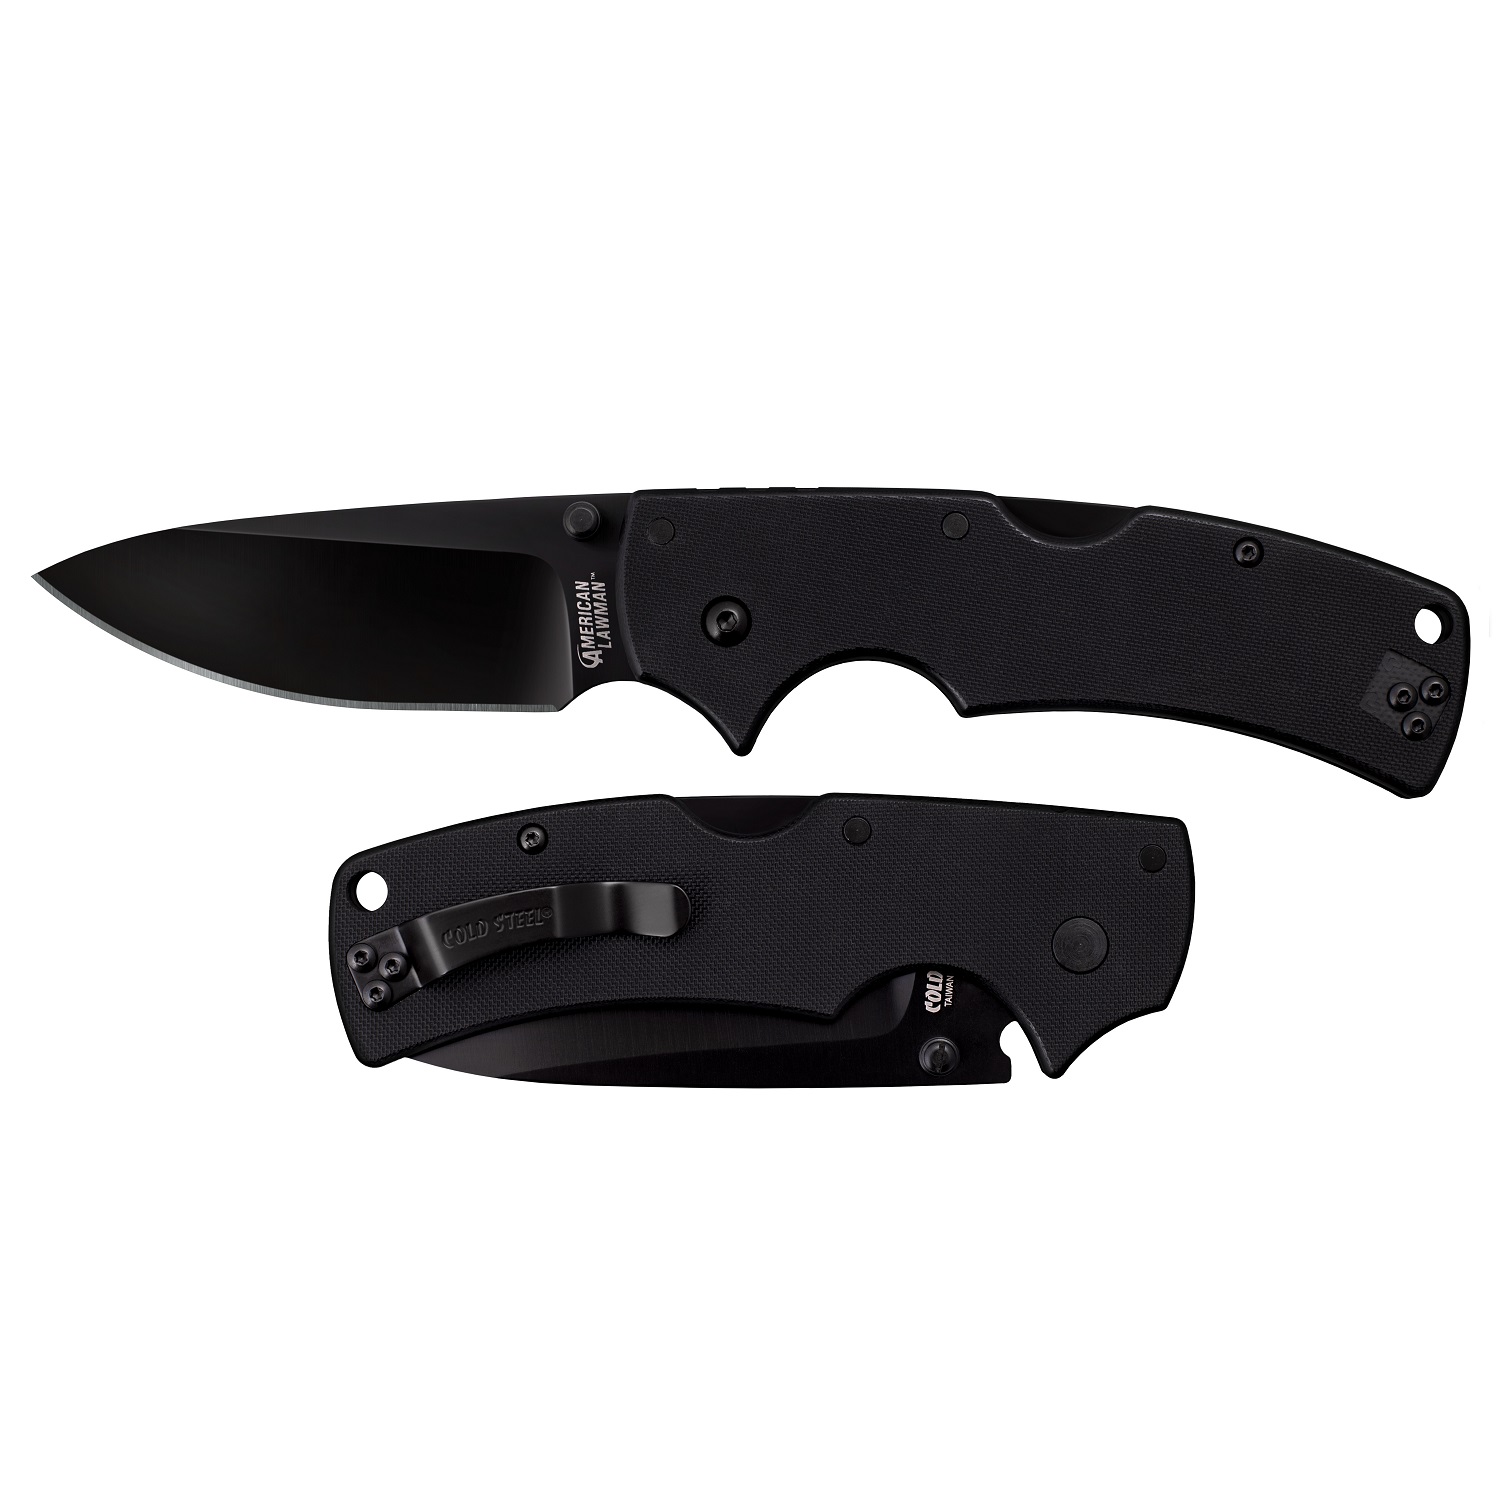 Cold Steel American Lawman Folding Knife 3-1/2"  S35VN Blade G10 Handles